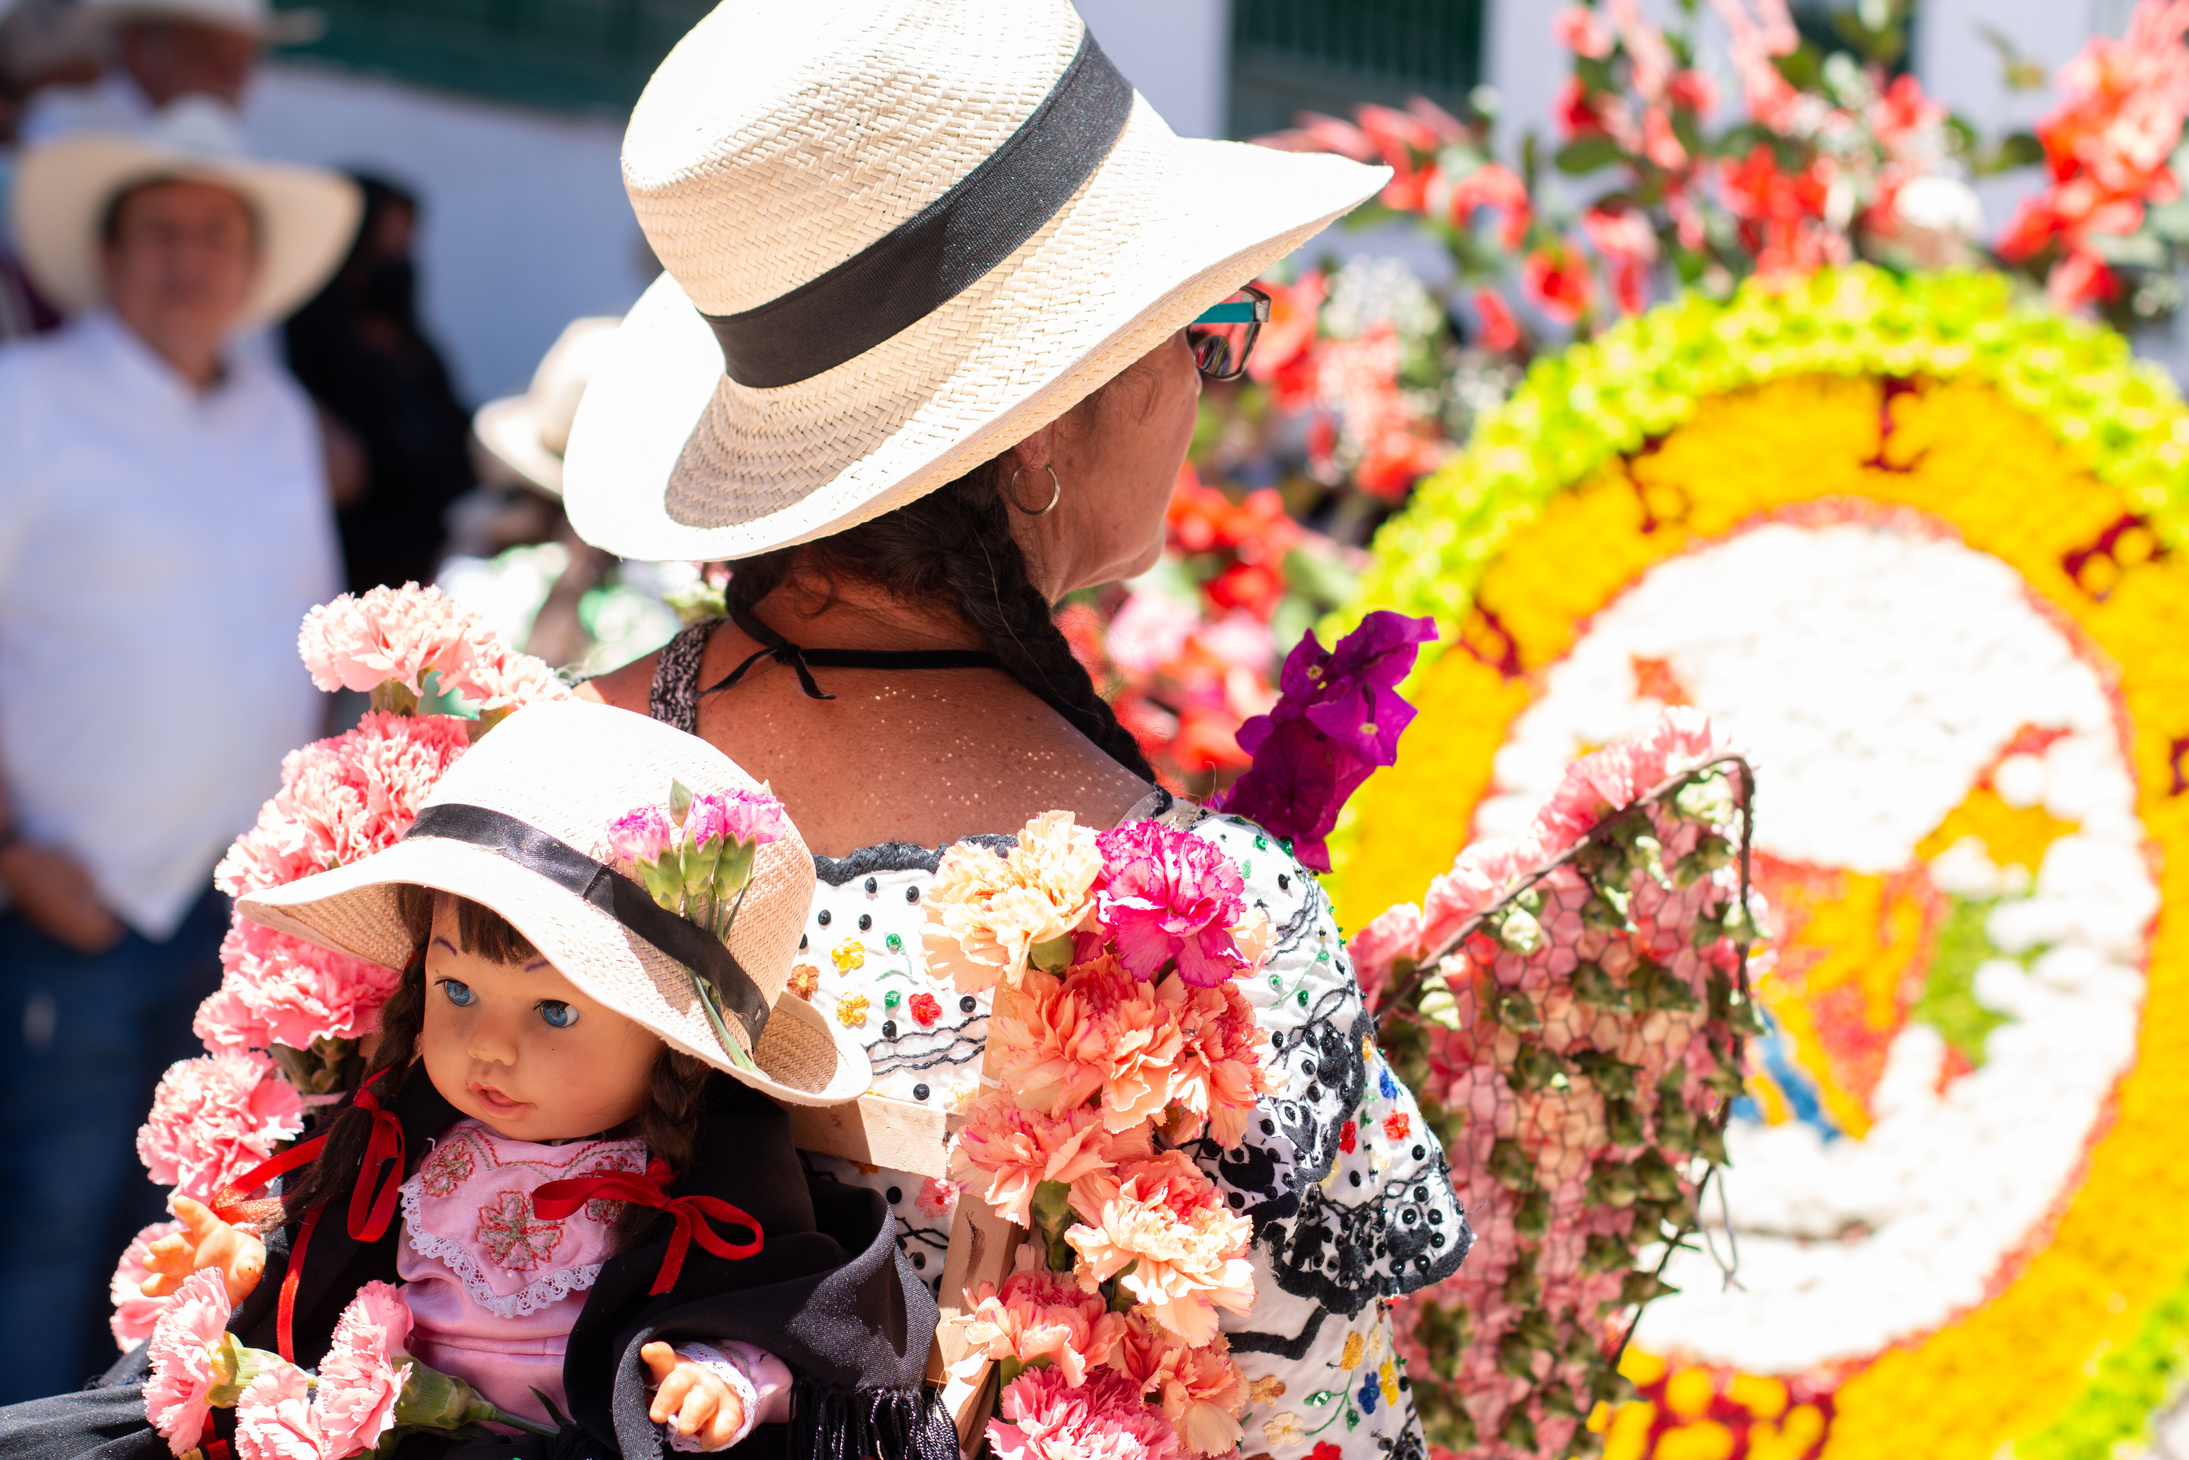 Woman seen from the back with hat and typical costume of Colombian culture at the flower festival.